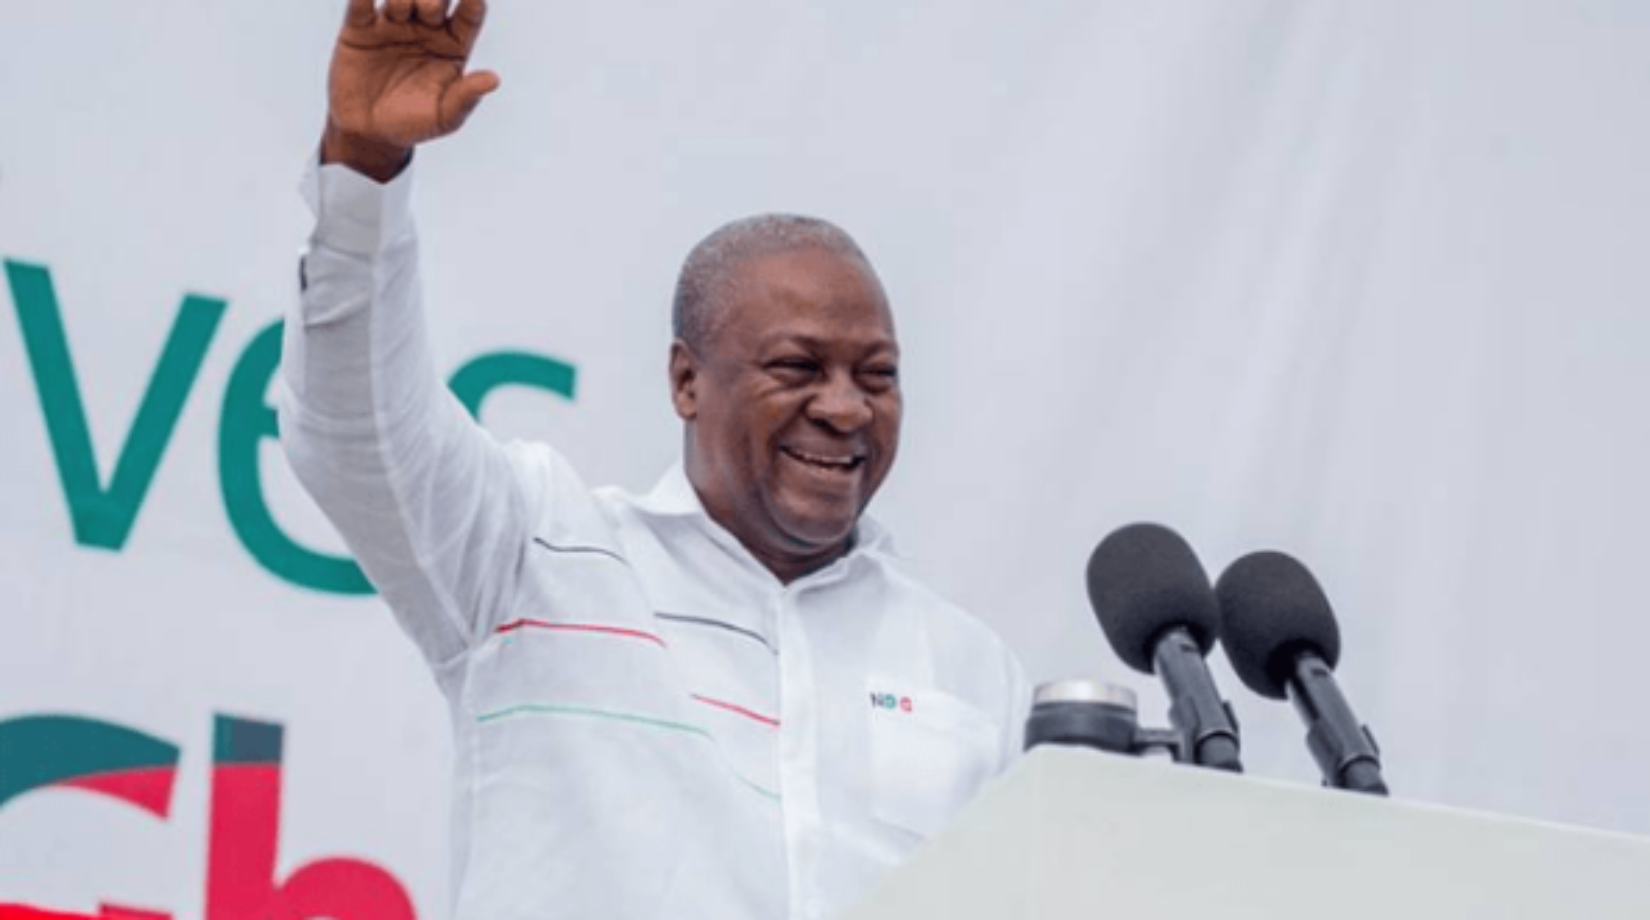 Mahama submits running mate choice to party leadership Ahead of December 7 Polls